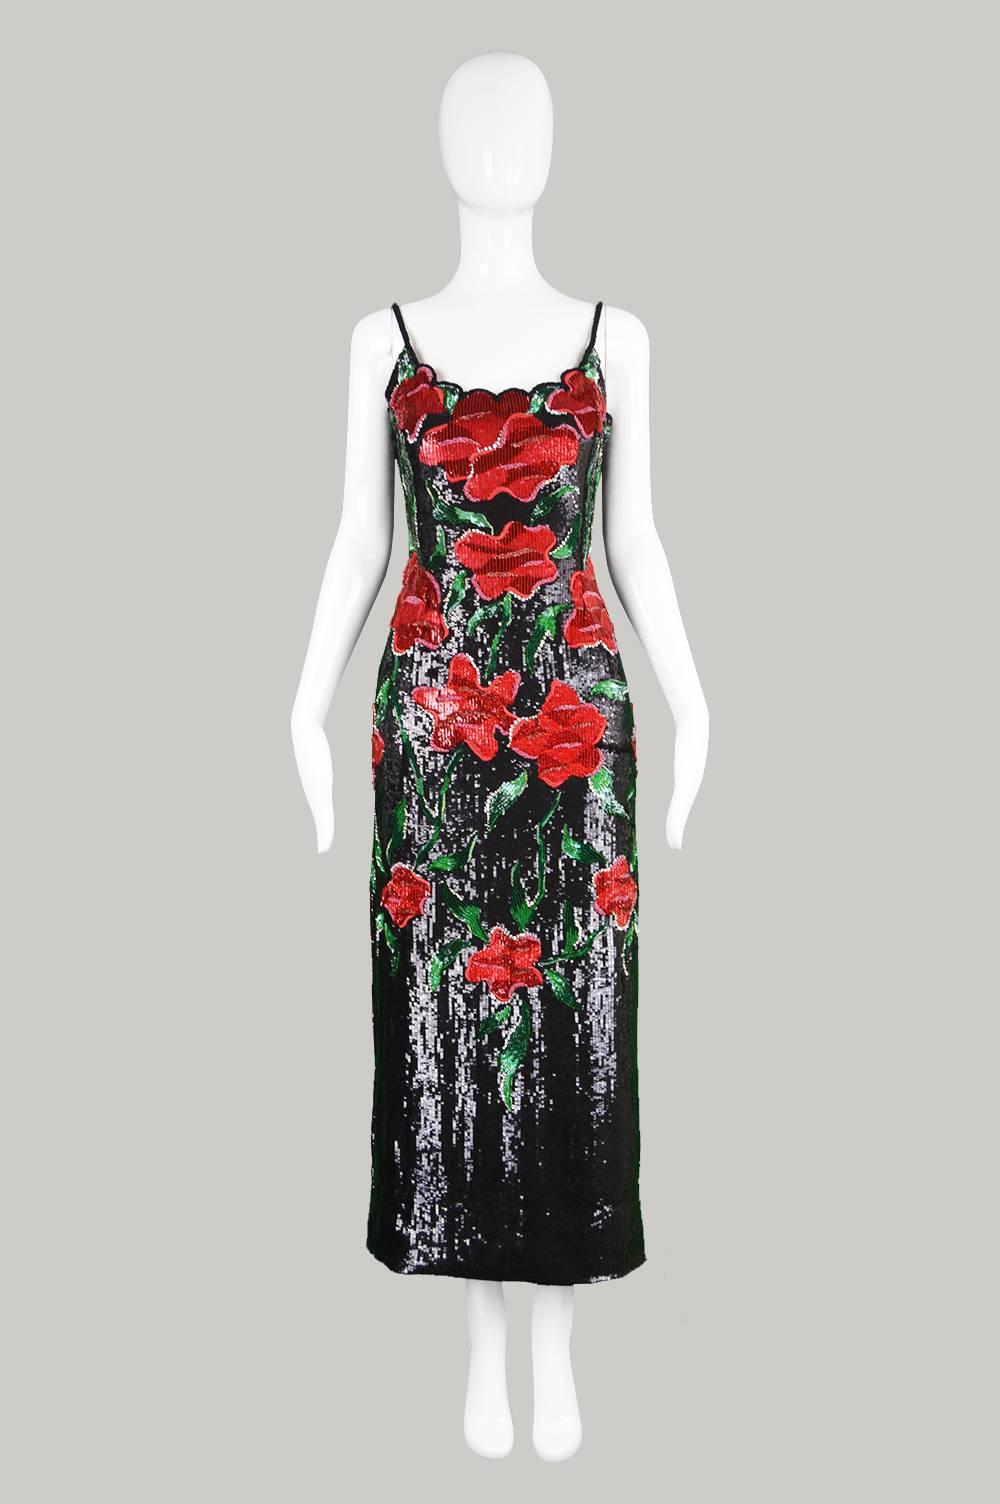 An exquisite couture vintage evening dress from c.the 1990’s by Italian designer, Renato Balestra. Incredibly glamorous, constructed in black, red and green sequins on a silk backing with hand embroidery throughout, creating a floral pattern. The